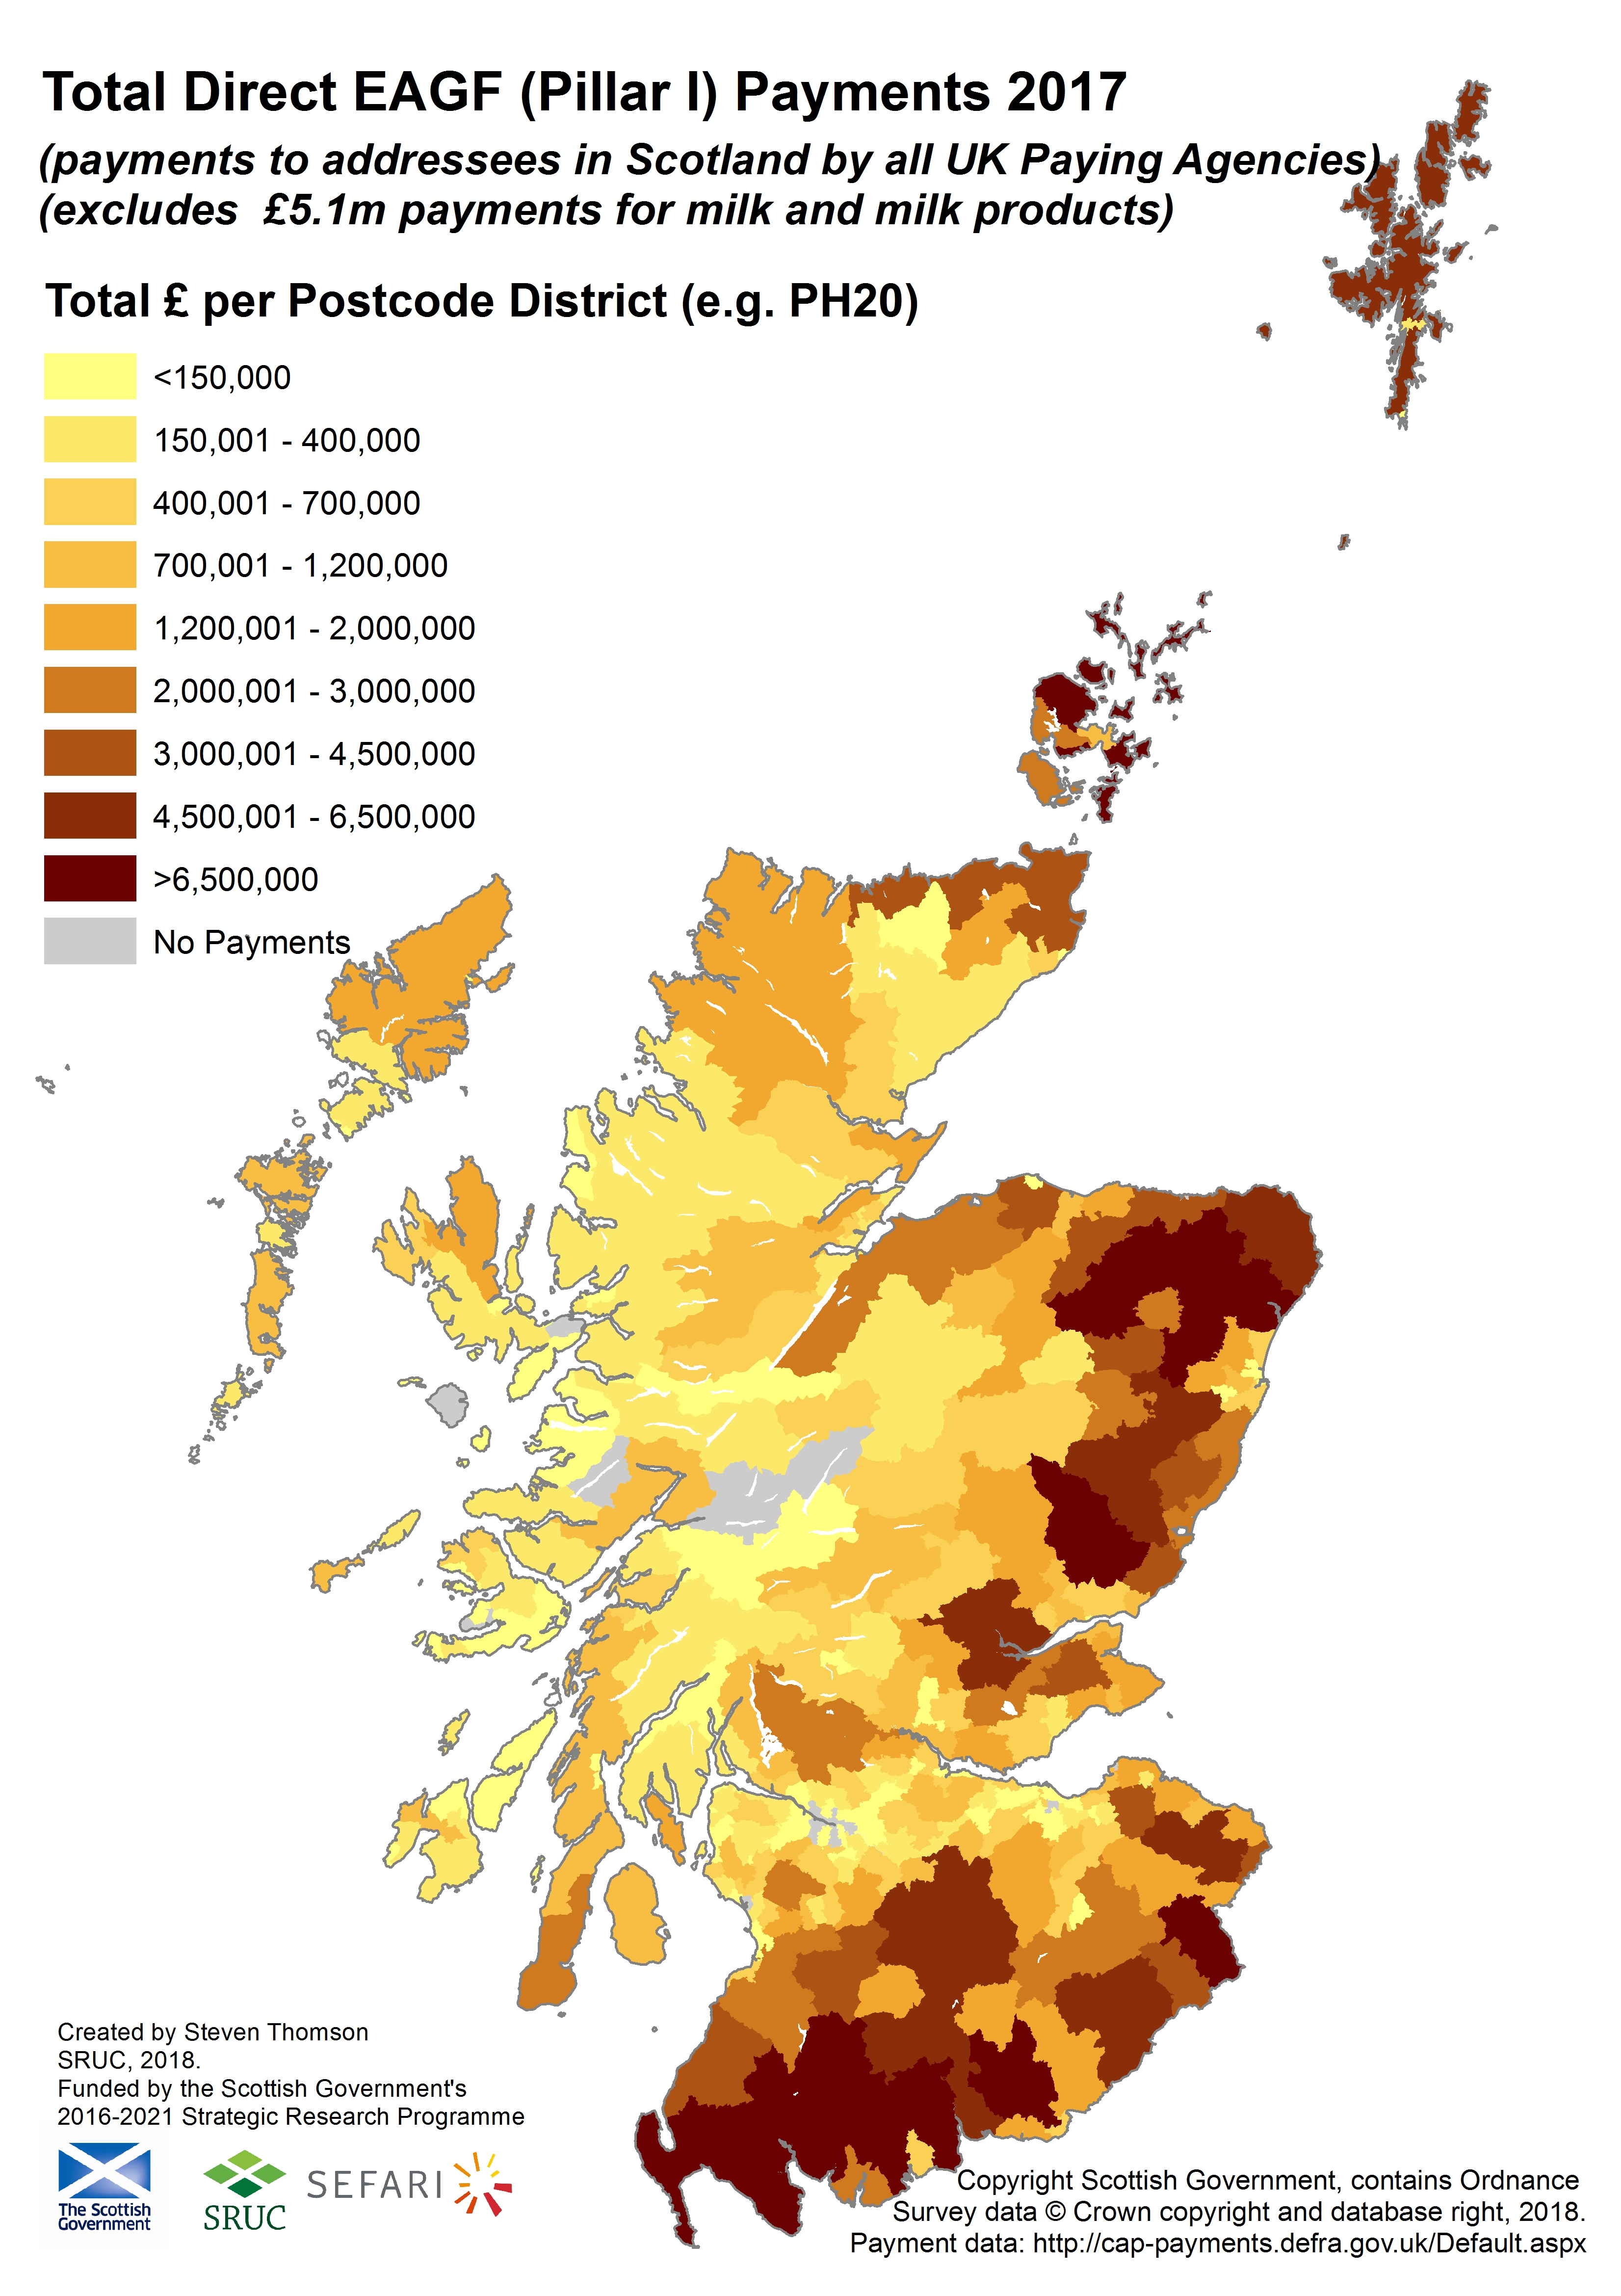 research funding scotland